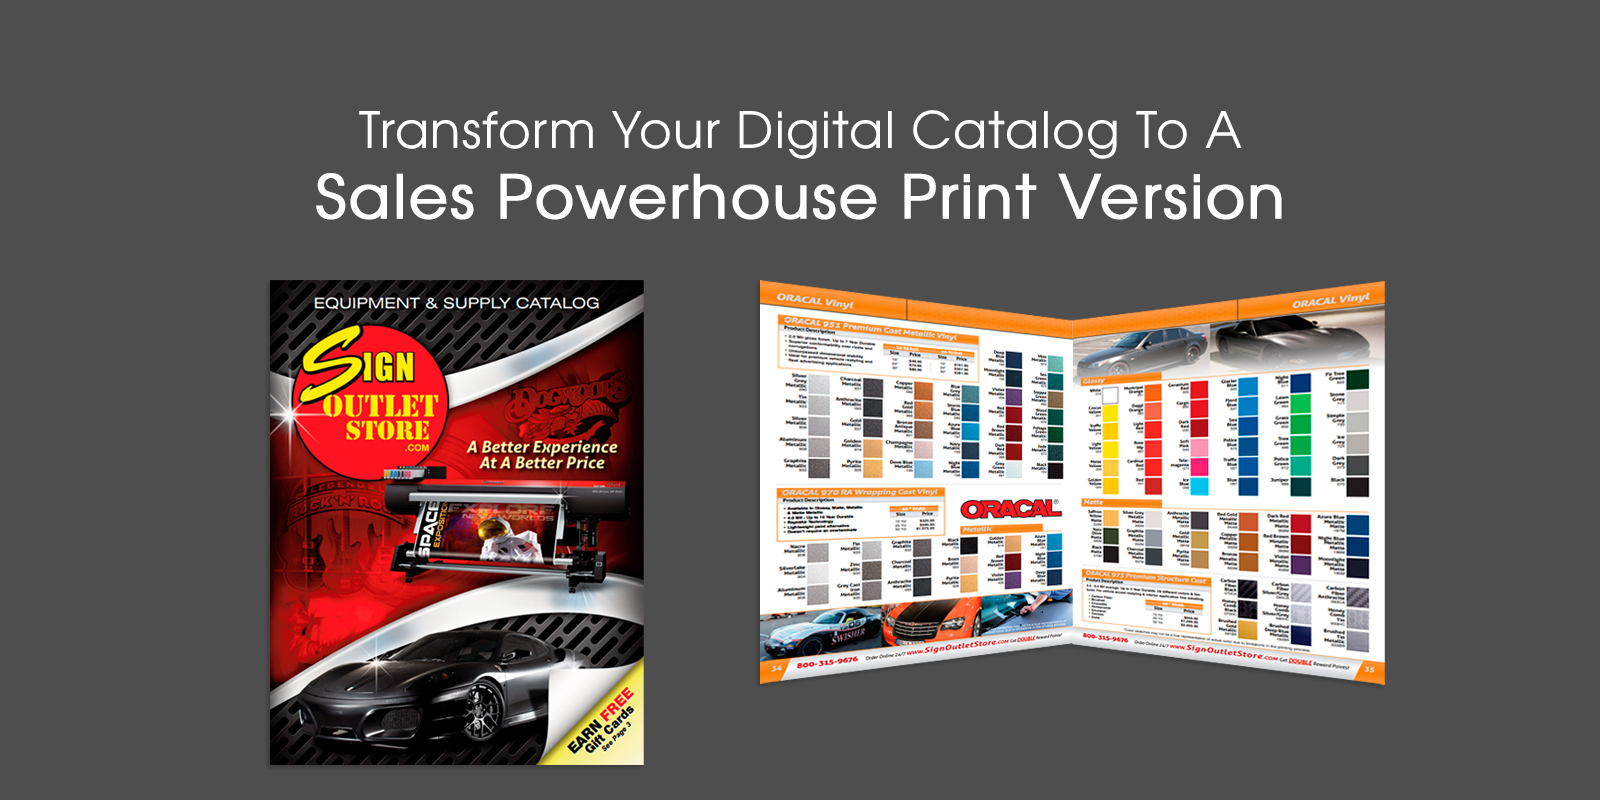 Transform Your Digital Catalog To A Sales Powerhouse Printed Version